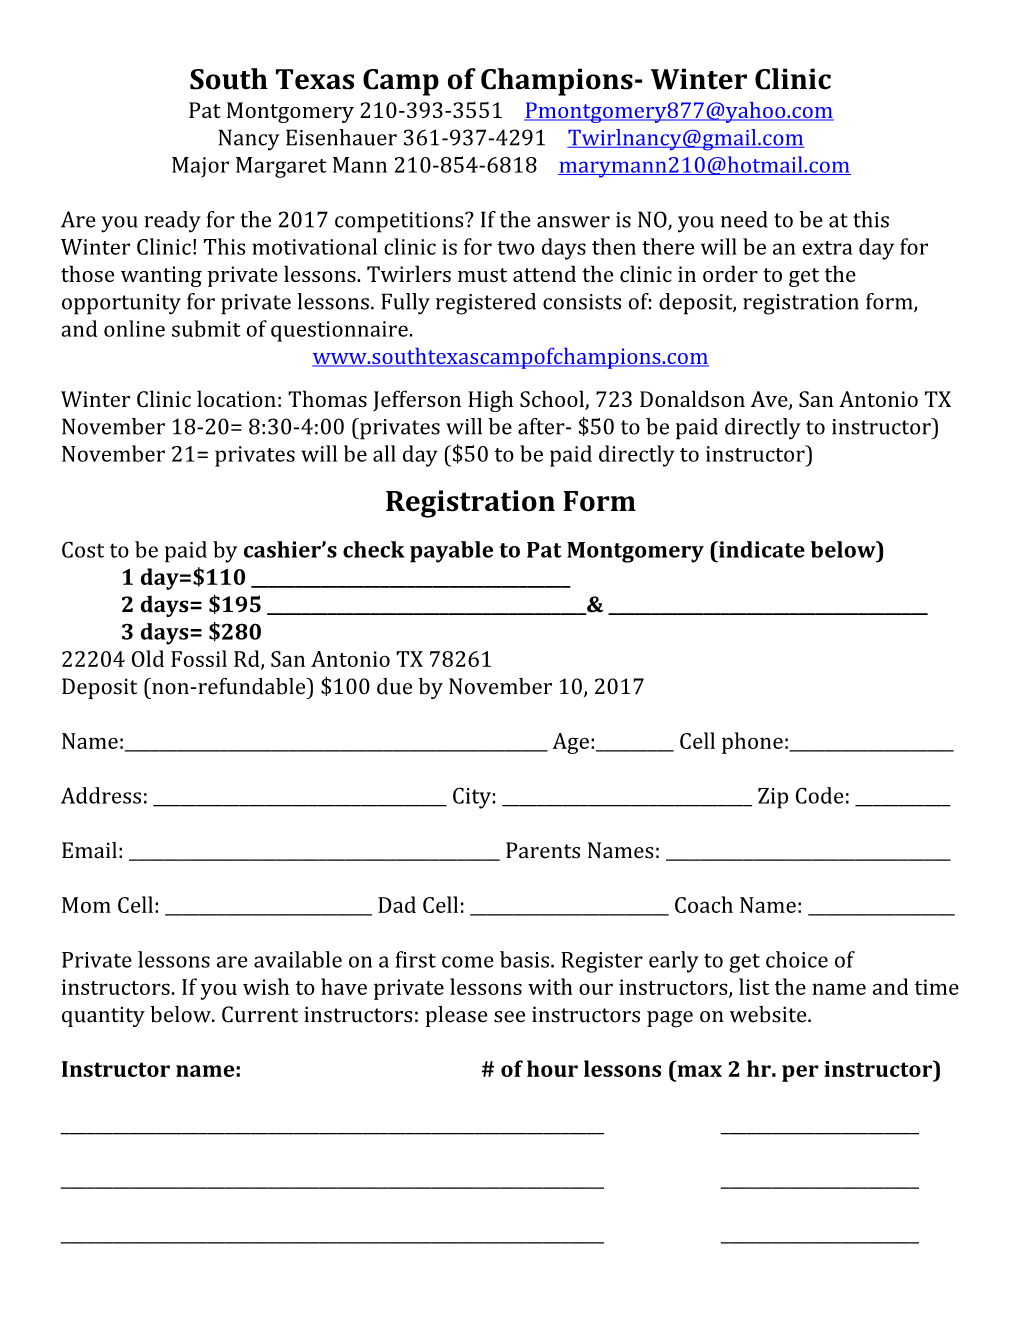 South Texas Camp of Champions- Winter Clinic